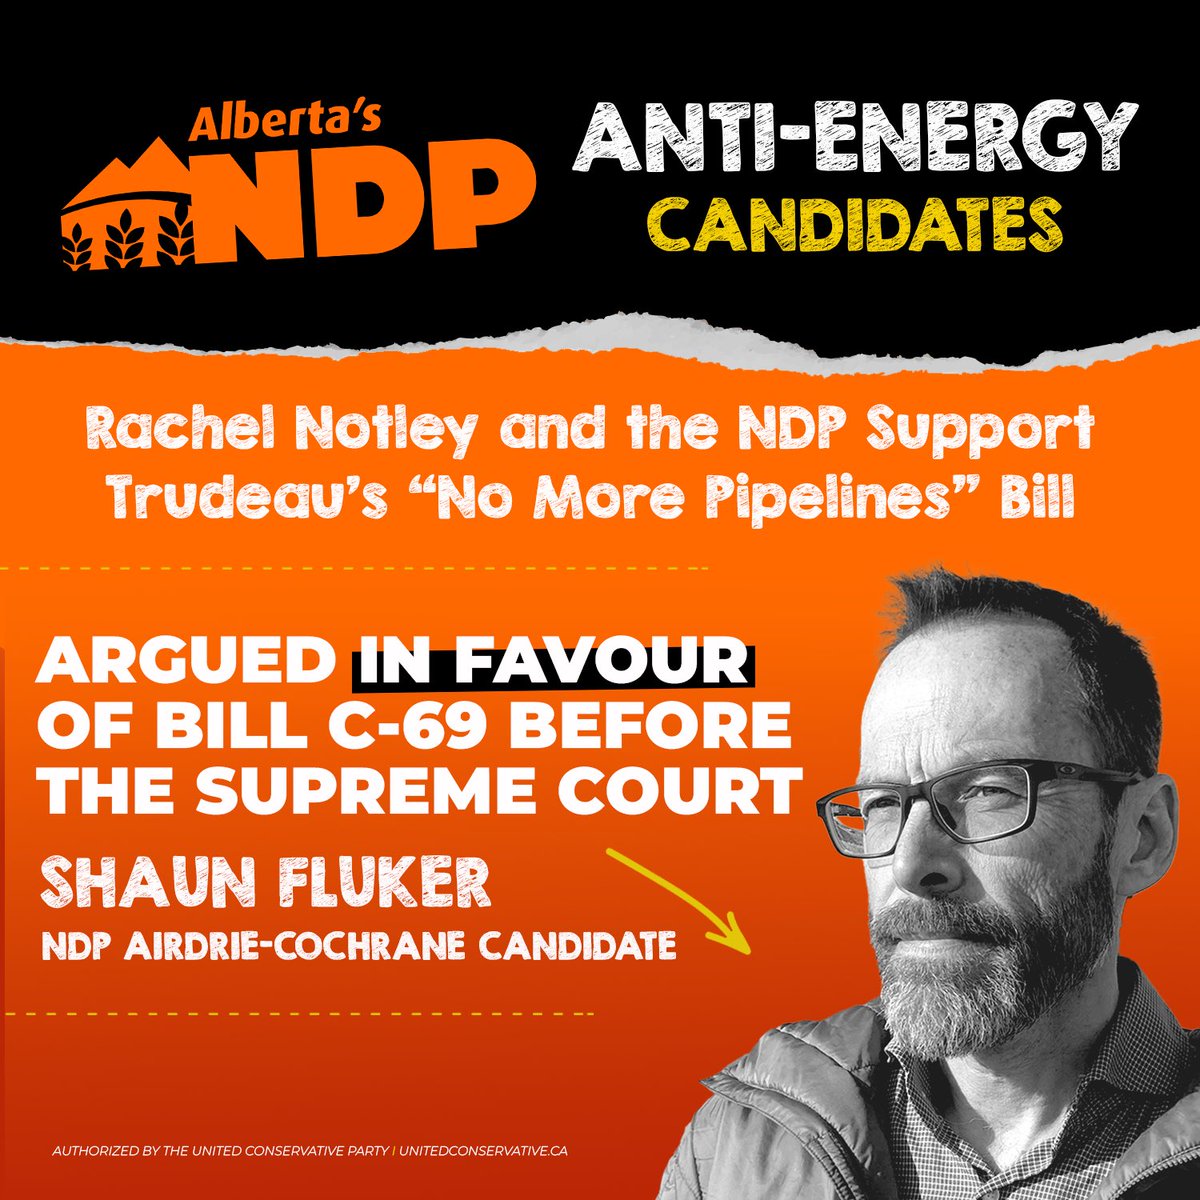 🚨 BREAKING 🚨 Shaun Fluker, Rachel Notley’s candidate in #Airdrie-#Cochrane, argued IN FAVOUR of #BillC69, Trudeau’s “No More Pipelines Act,” before the Supreme Court of Canada. This is another example of the NDP actively hurting our energy sector and economy. #ableg #abvotes